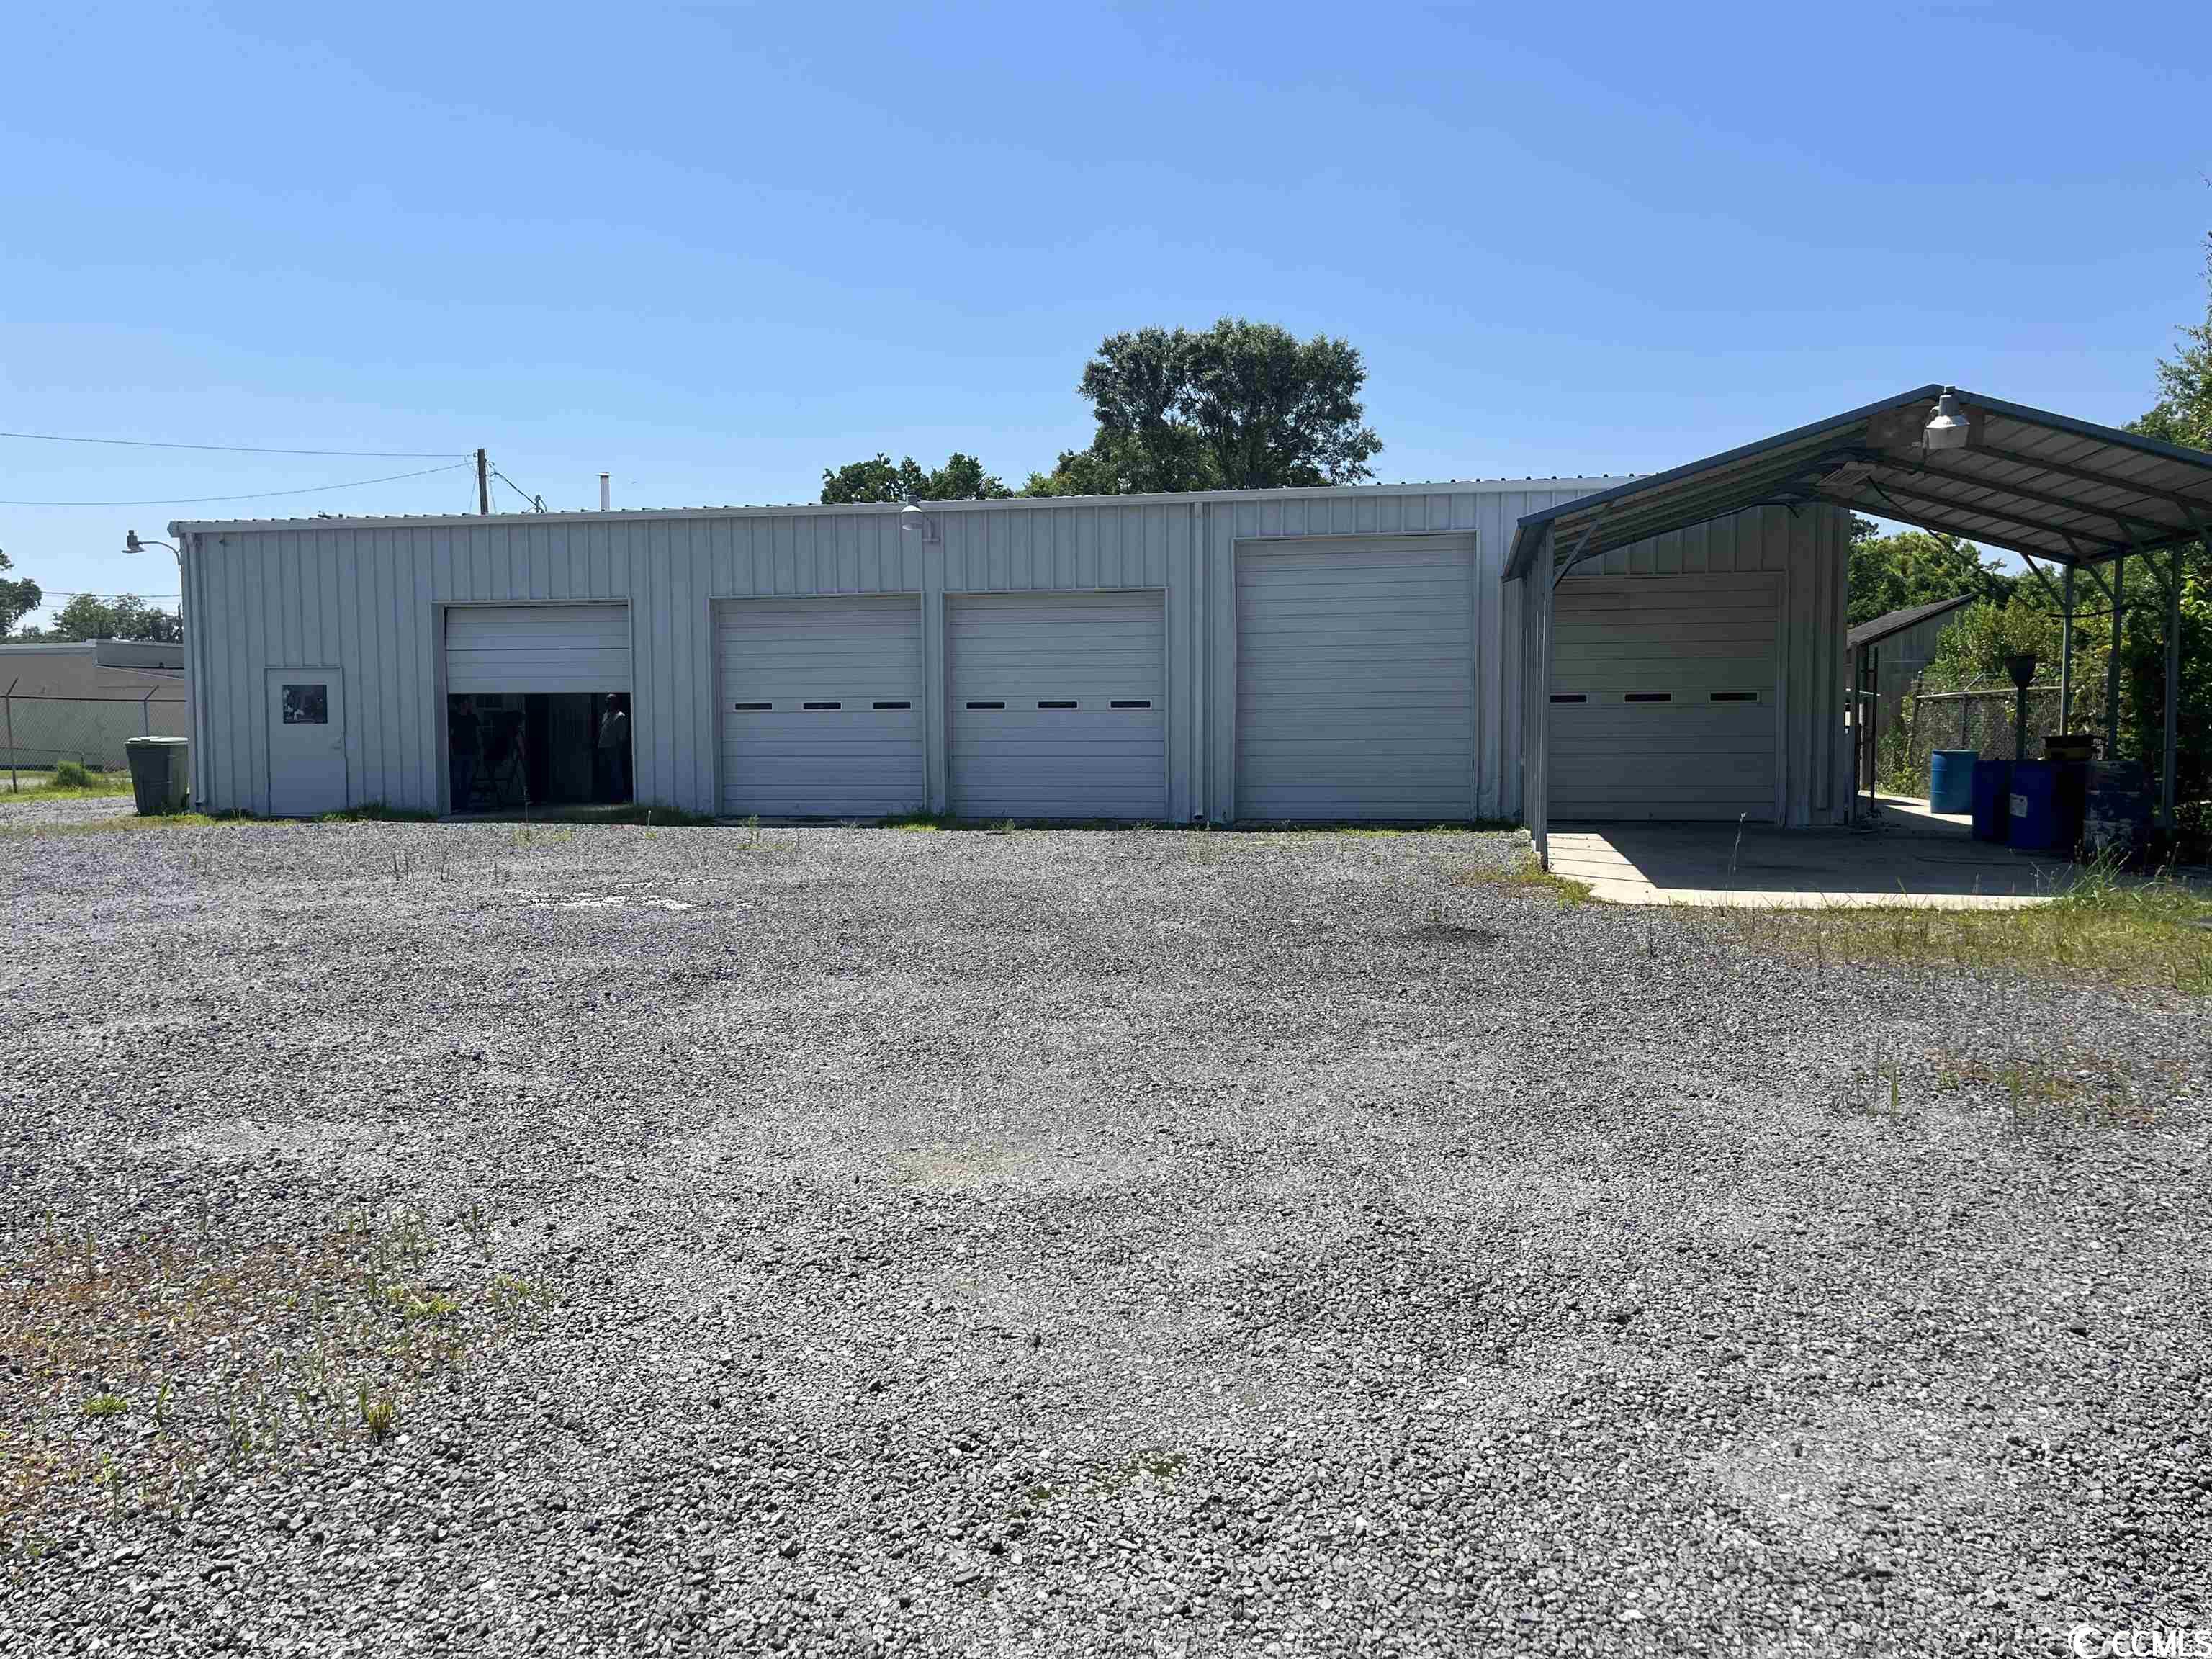 check out this perfect location for an auto body/mechanic garage. this 4,500 square foot garage is located in the city of georgetown with access from both merriman road and morgan street. it has 4 bays, 1 paint booth, ample storage space and both front and back parking lots completely fenced in. the office has its own sitting area for customers and two bathrooms. upstairs contains a small apartment with one full bathroom. come check out this space!